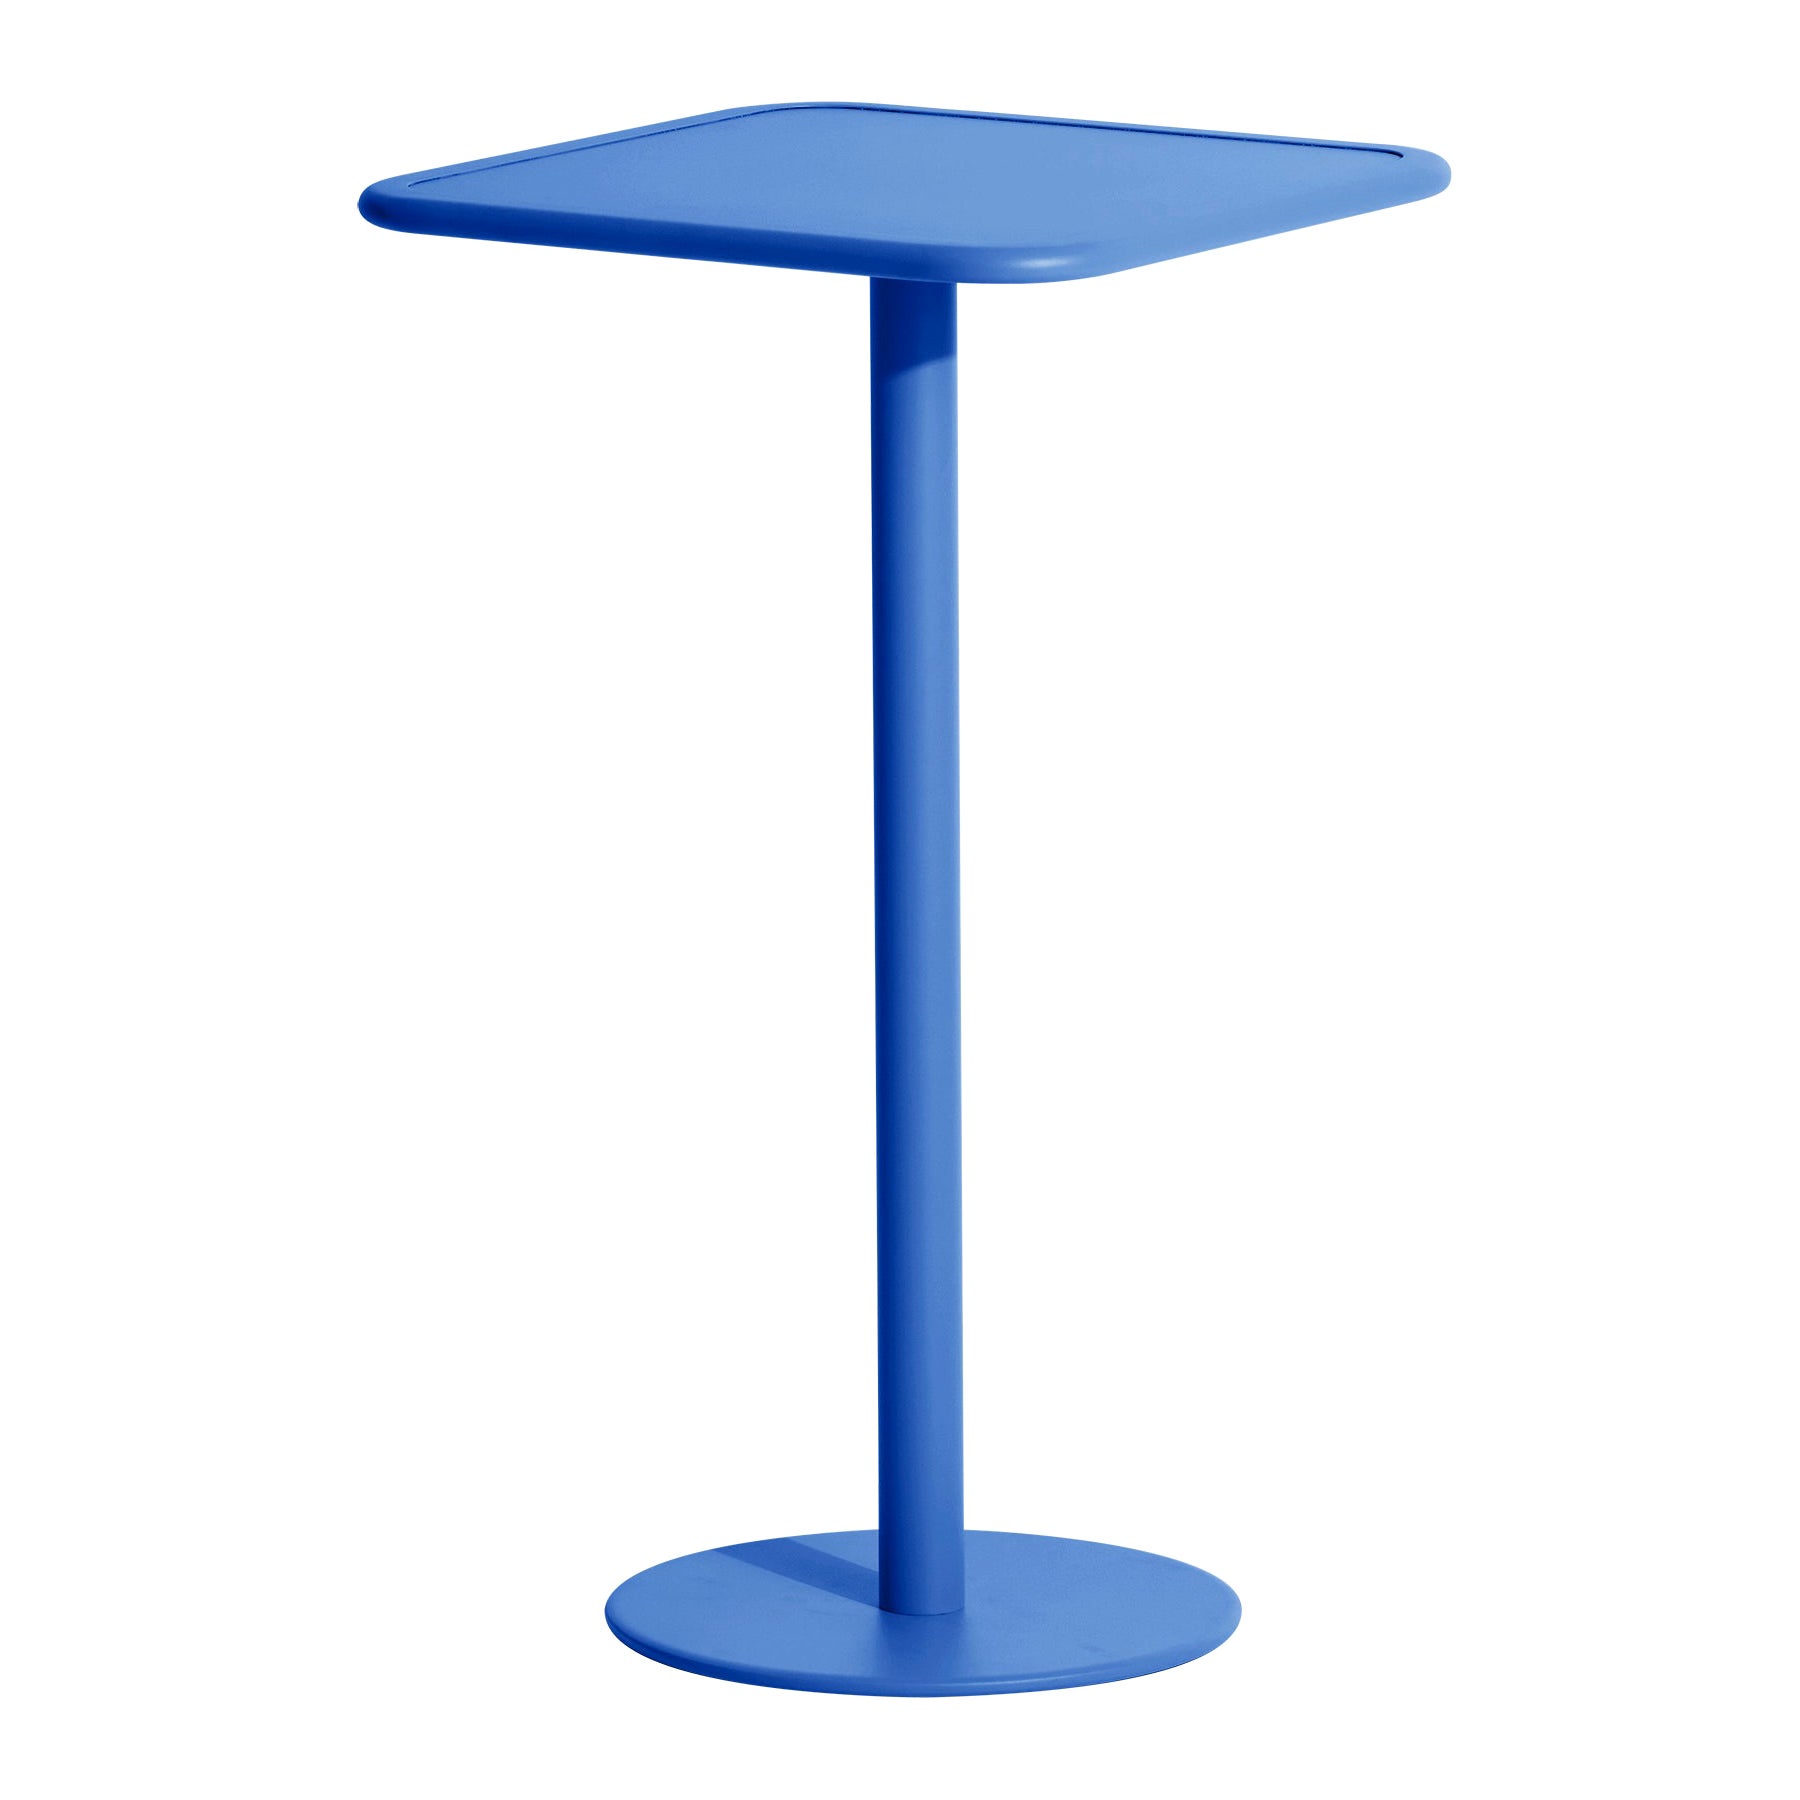 Petite Friture Week-End Square High Table in Blue Aluminium, 2017 For Sale